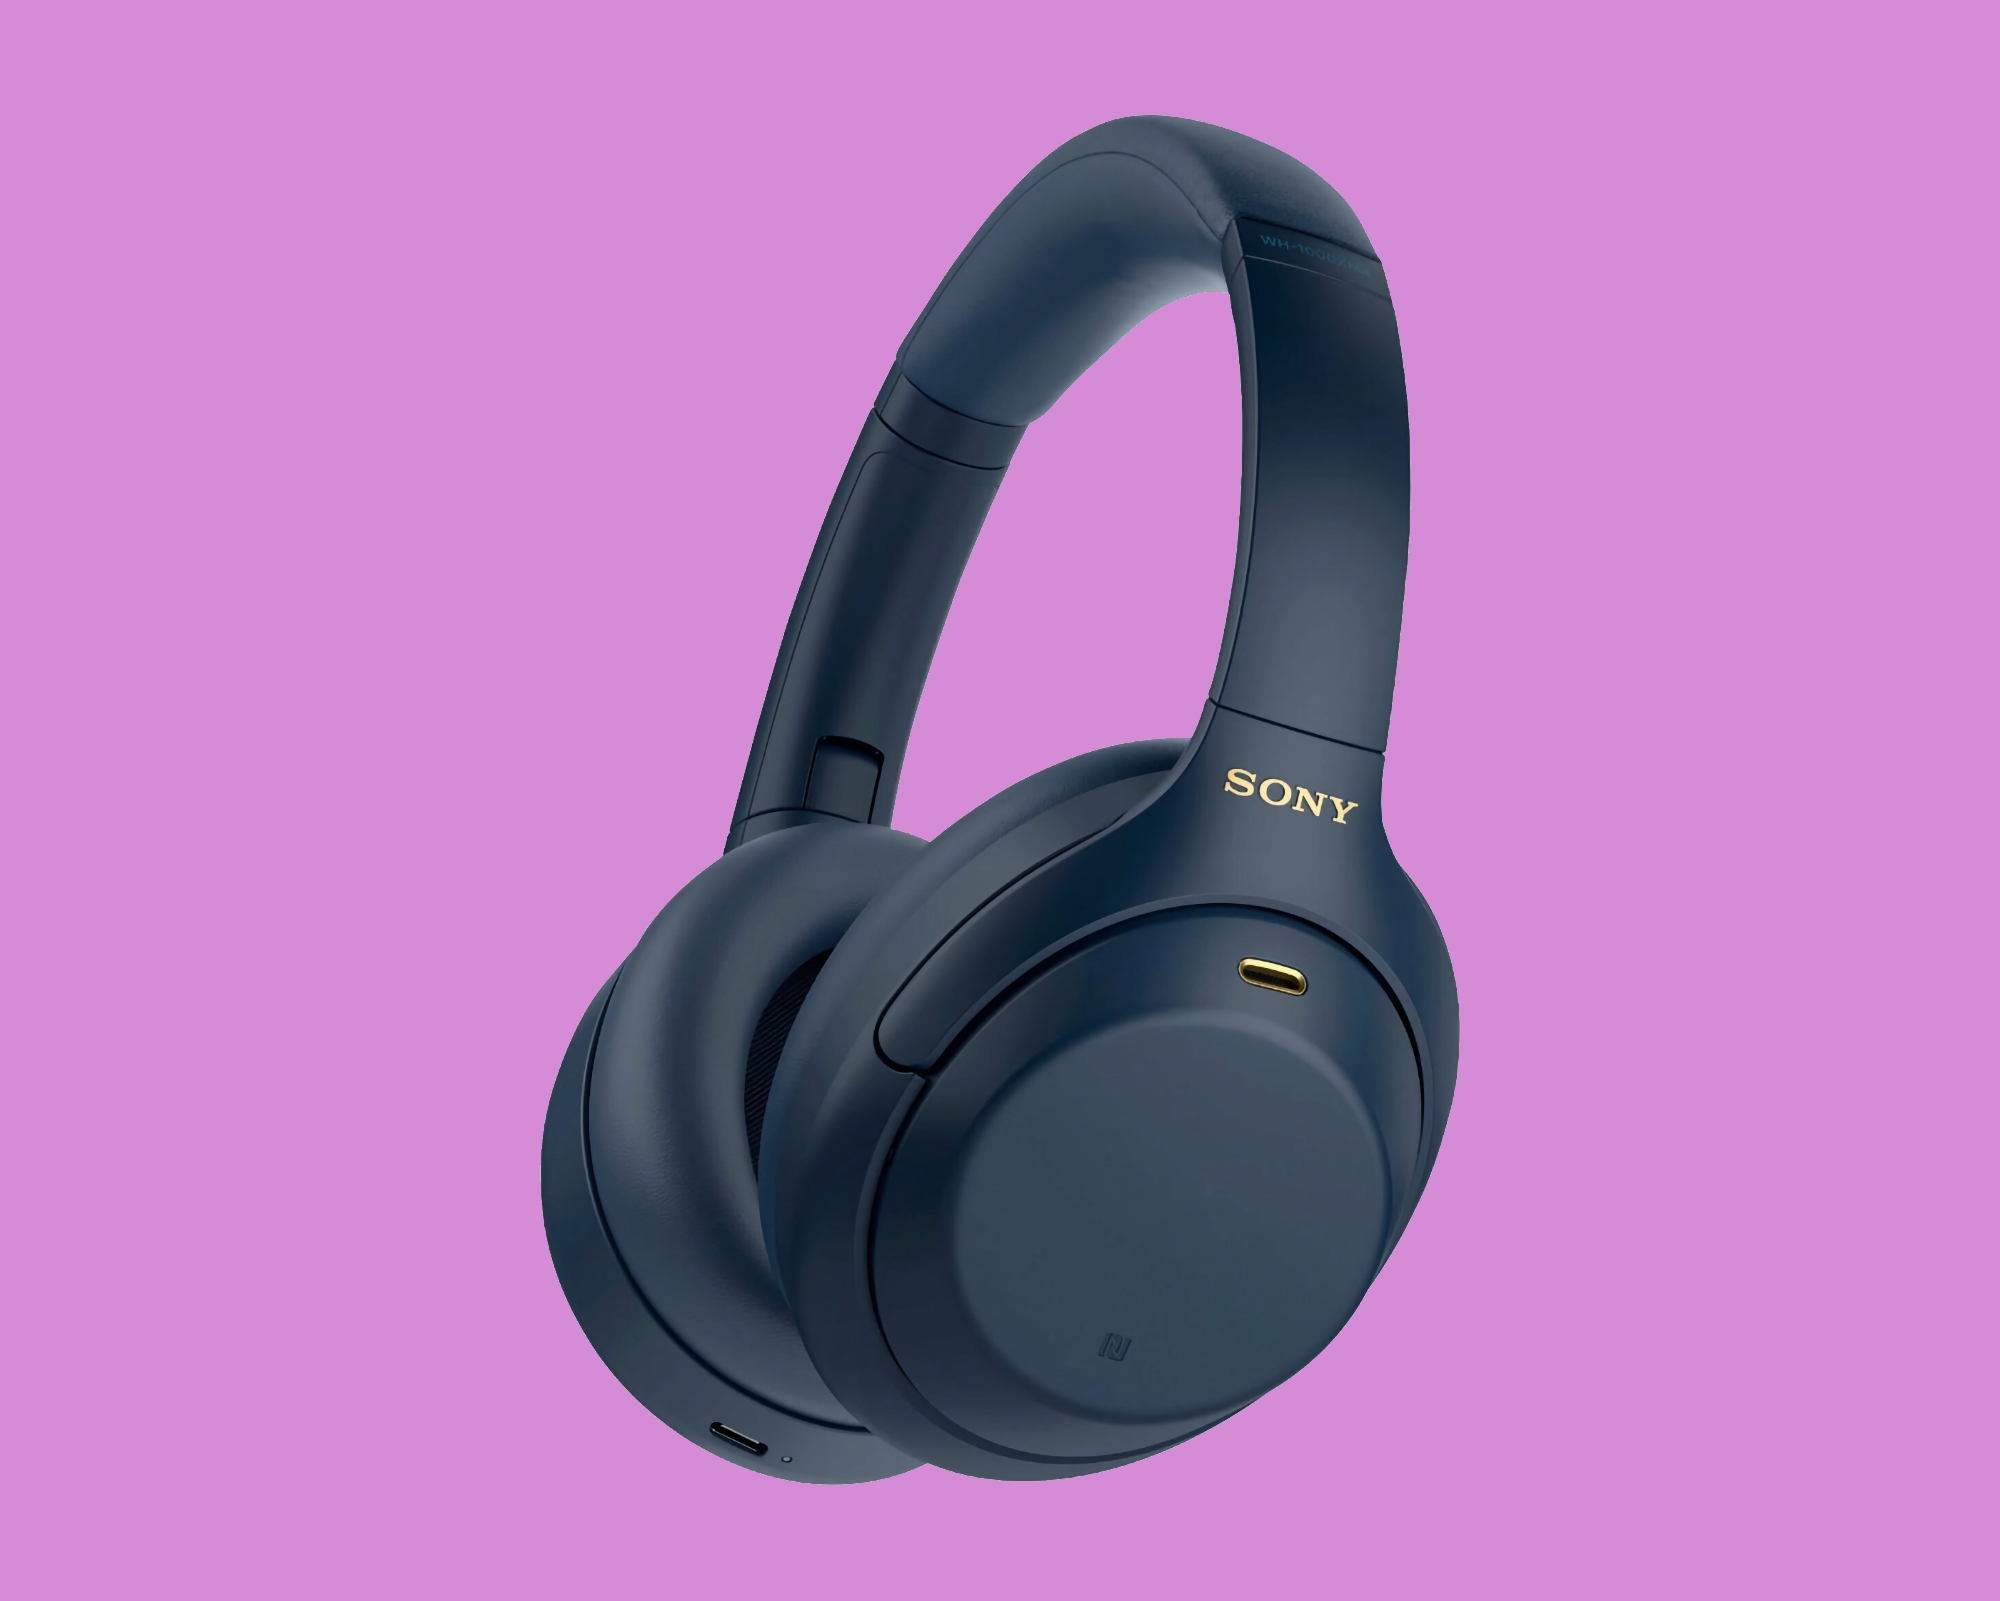 Sony WH-1000XM4 can be bought on Amazon for less than $250